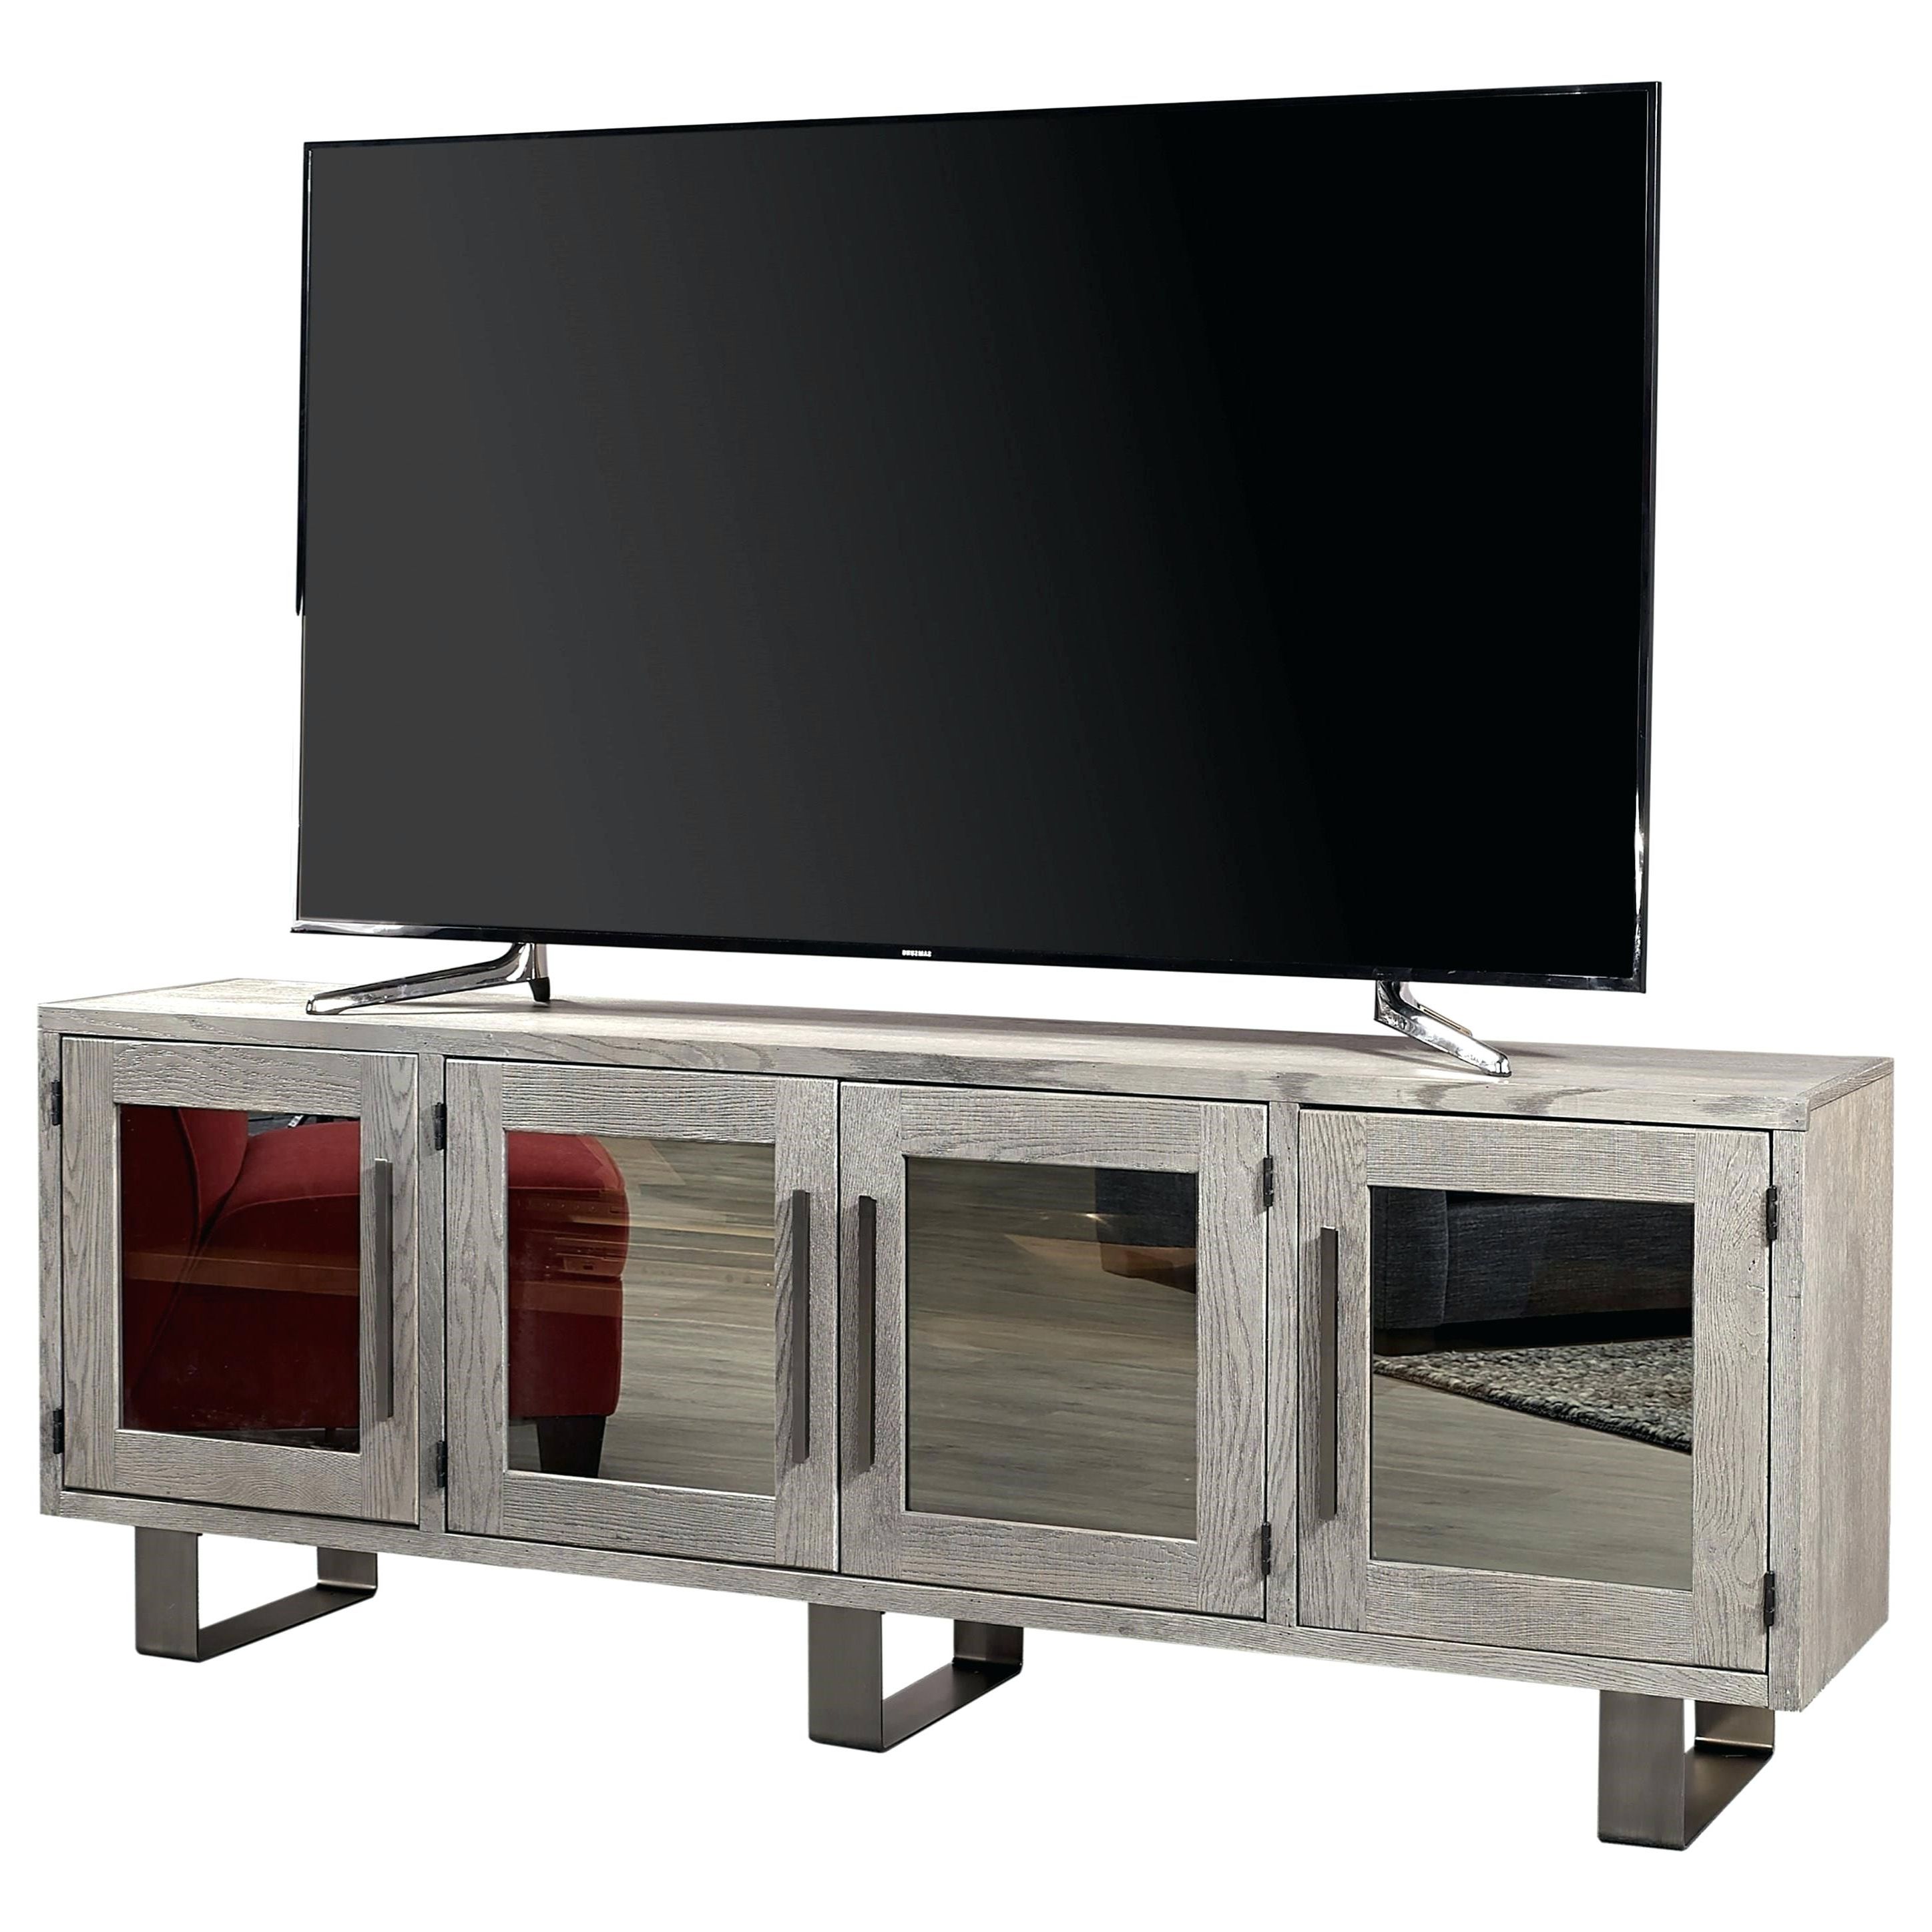 2018 84 Tv Console Console With Hutch Awe Inspiring Urban Farmhouse Alder With Ducar 84 Inch Tv Stands (View 9 of 20)